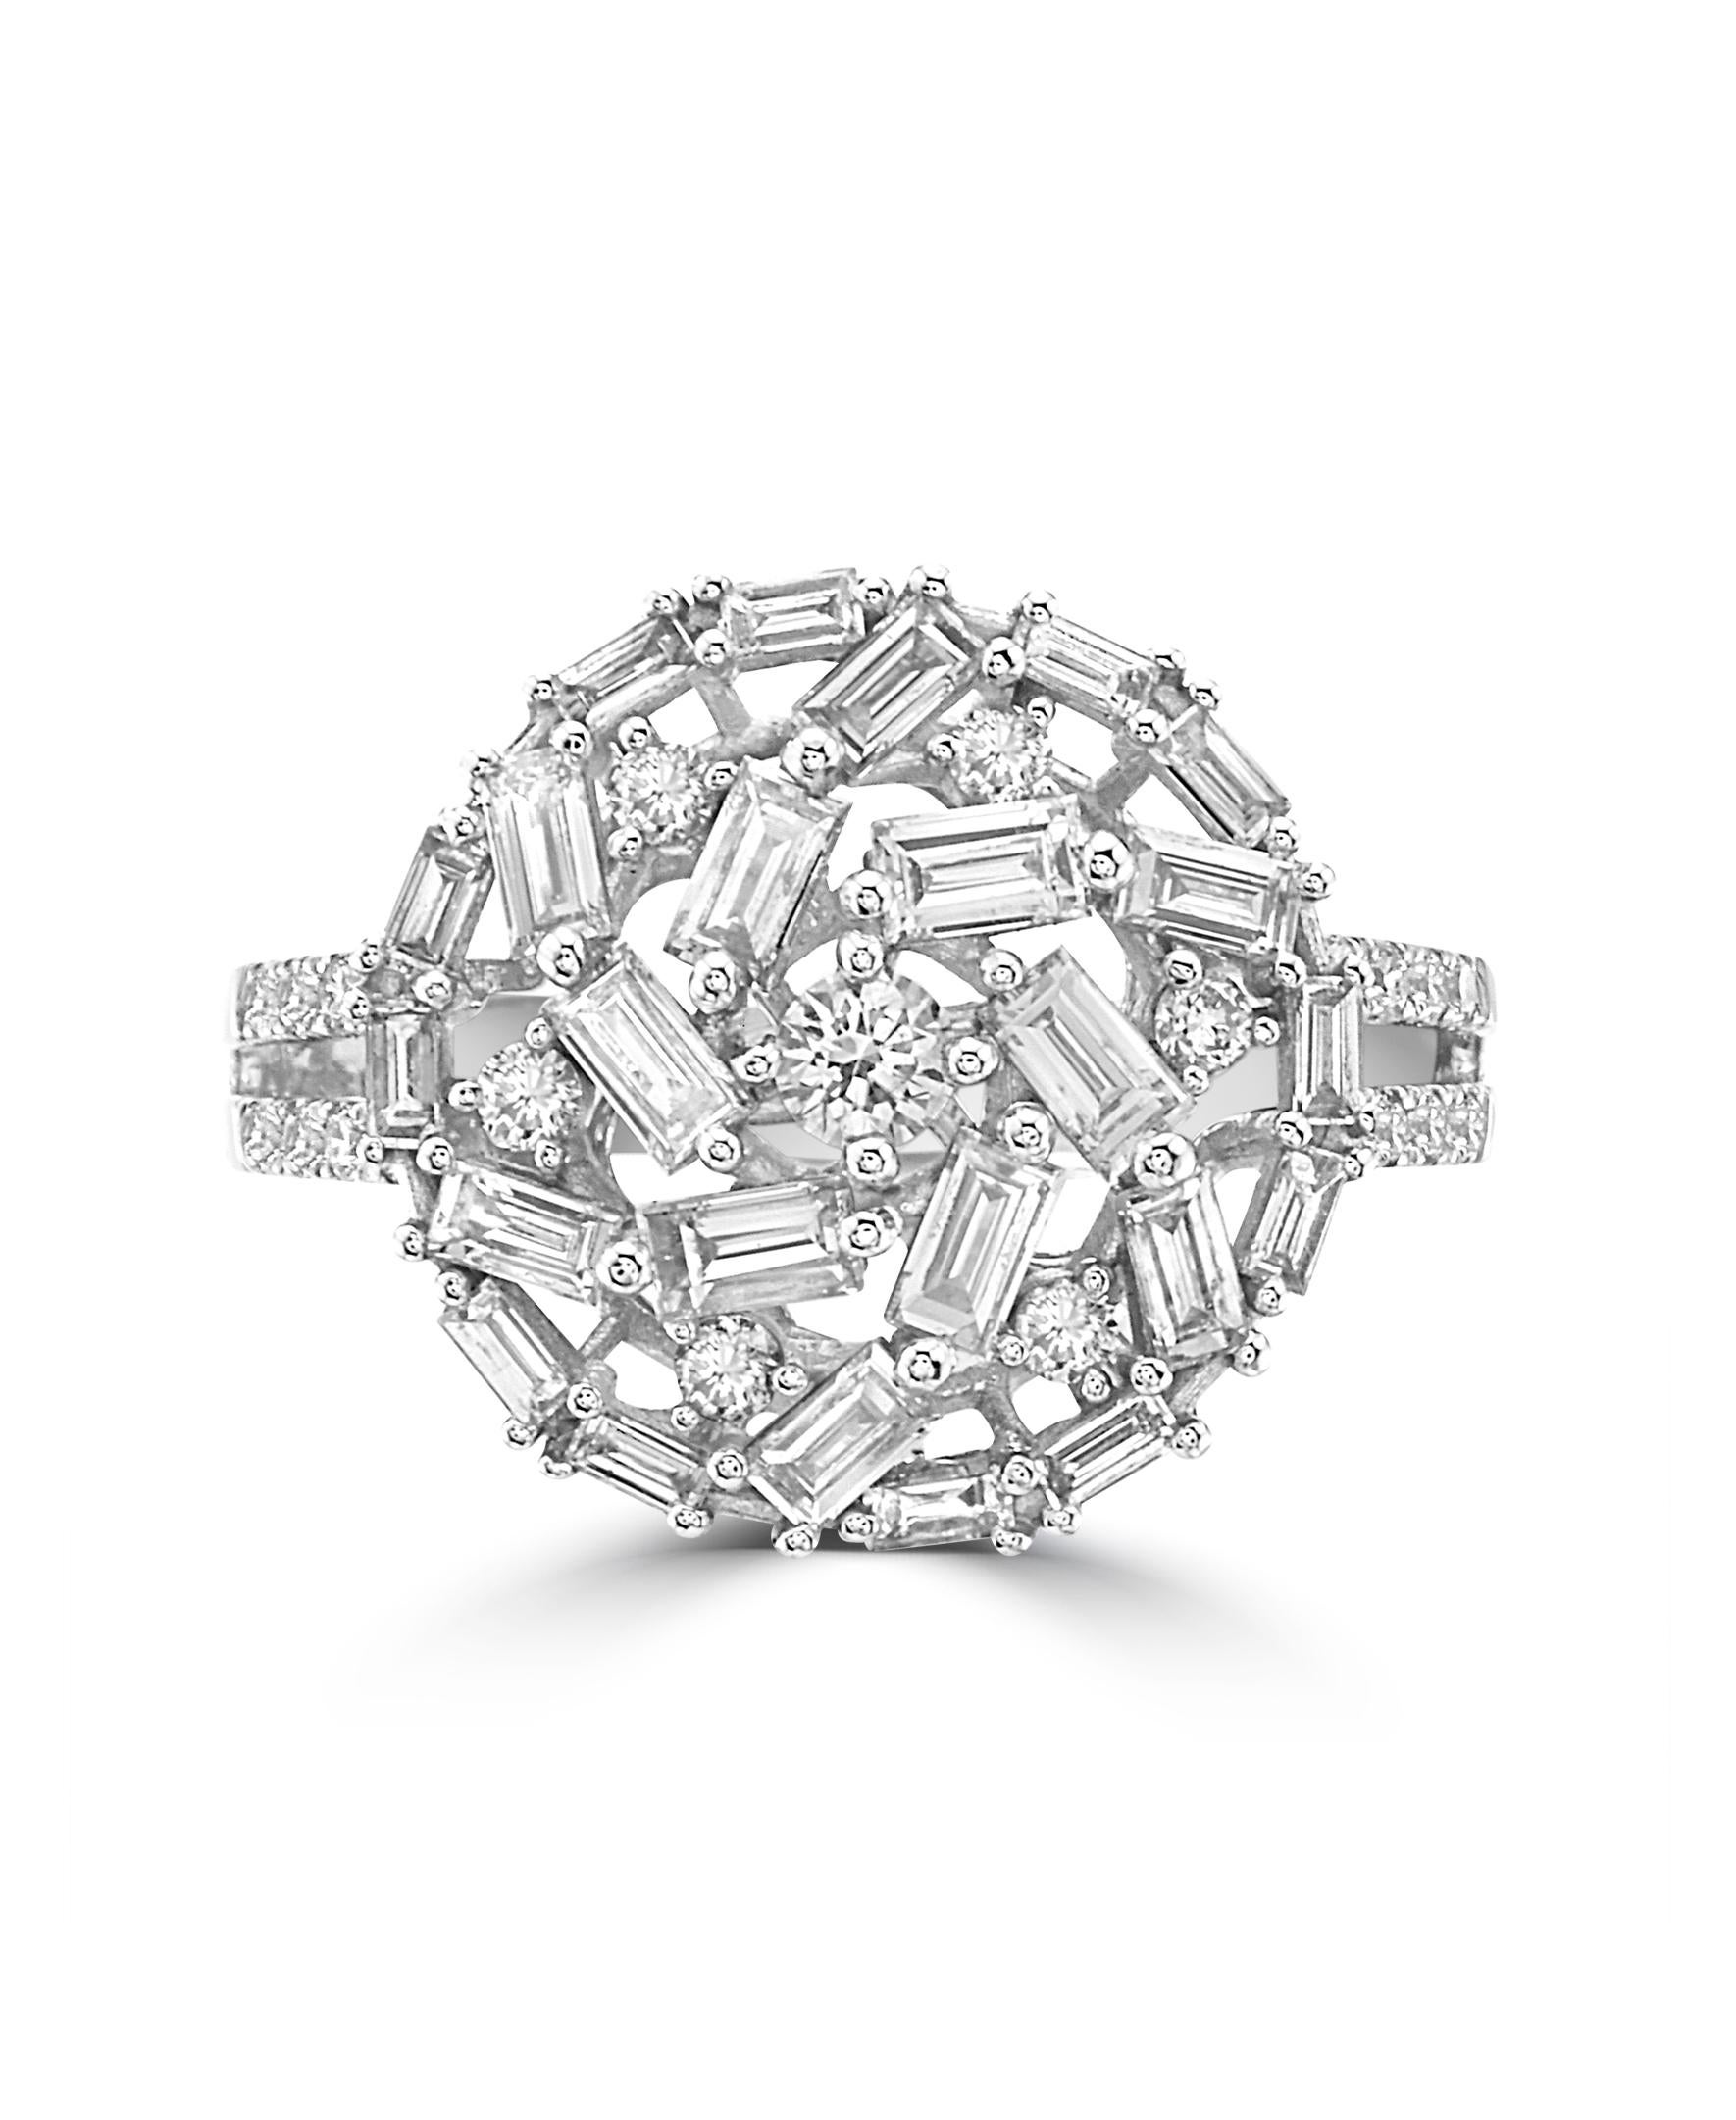 This Effy creation brings another unique style to jewelry design. The flowing interplay between the baguette and round diamonds will make it shine in every direction.

Diamonds have a total weight of 0.90ct.

The ring is size 7.

Item number  CY95.

